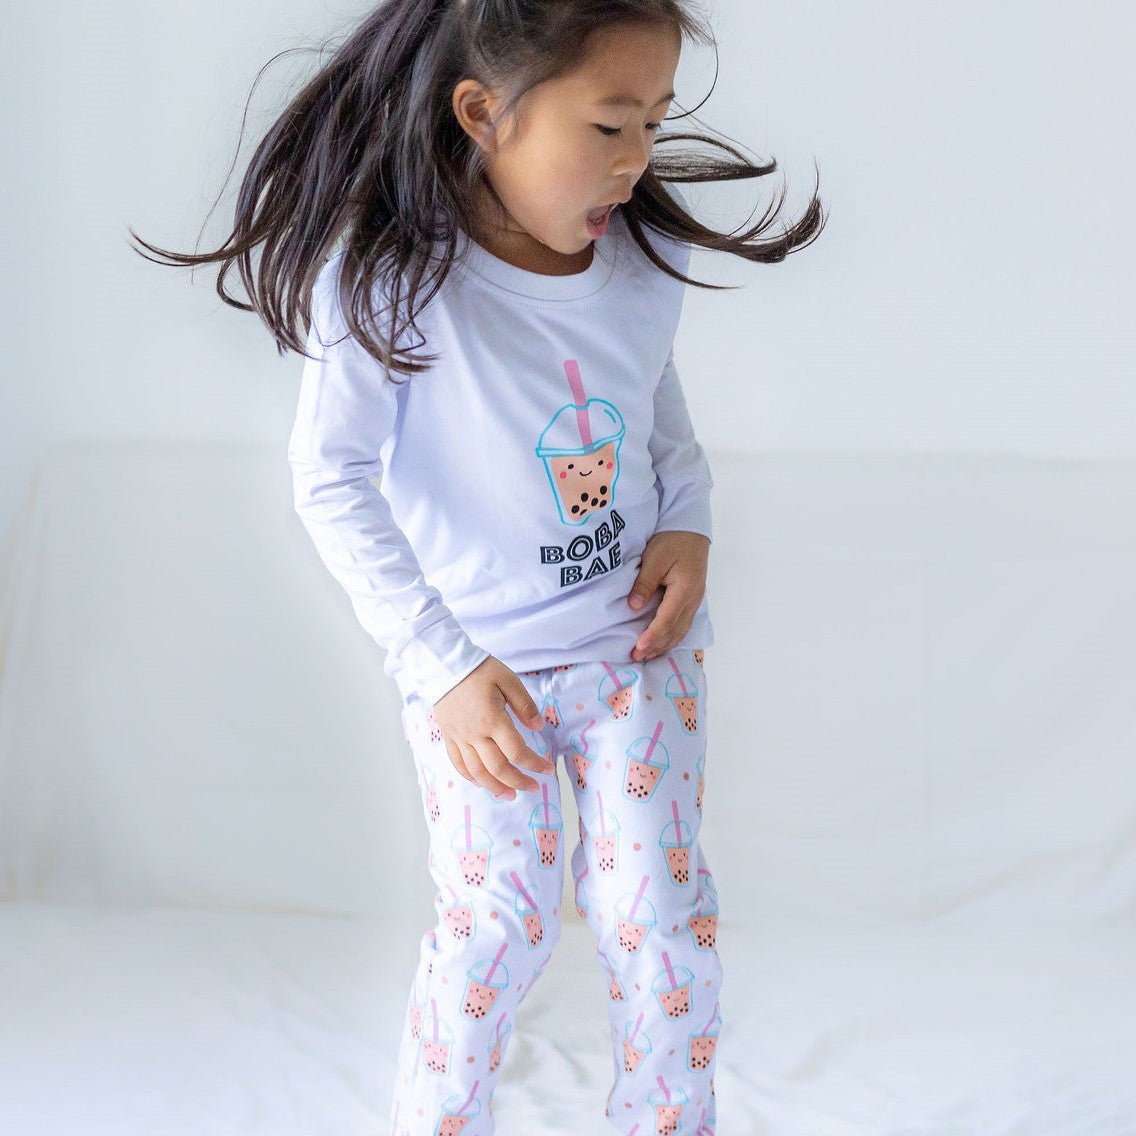 Summer Pajamas and Loungewear - Cute and Comfortable! - Welcome